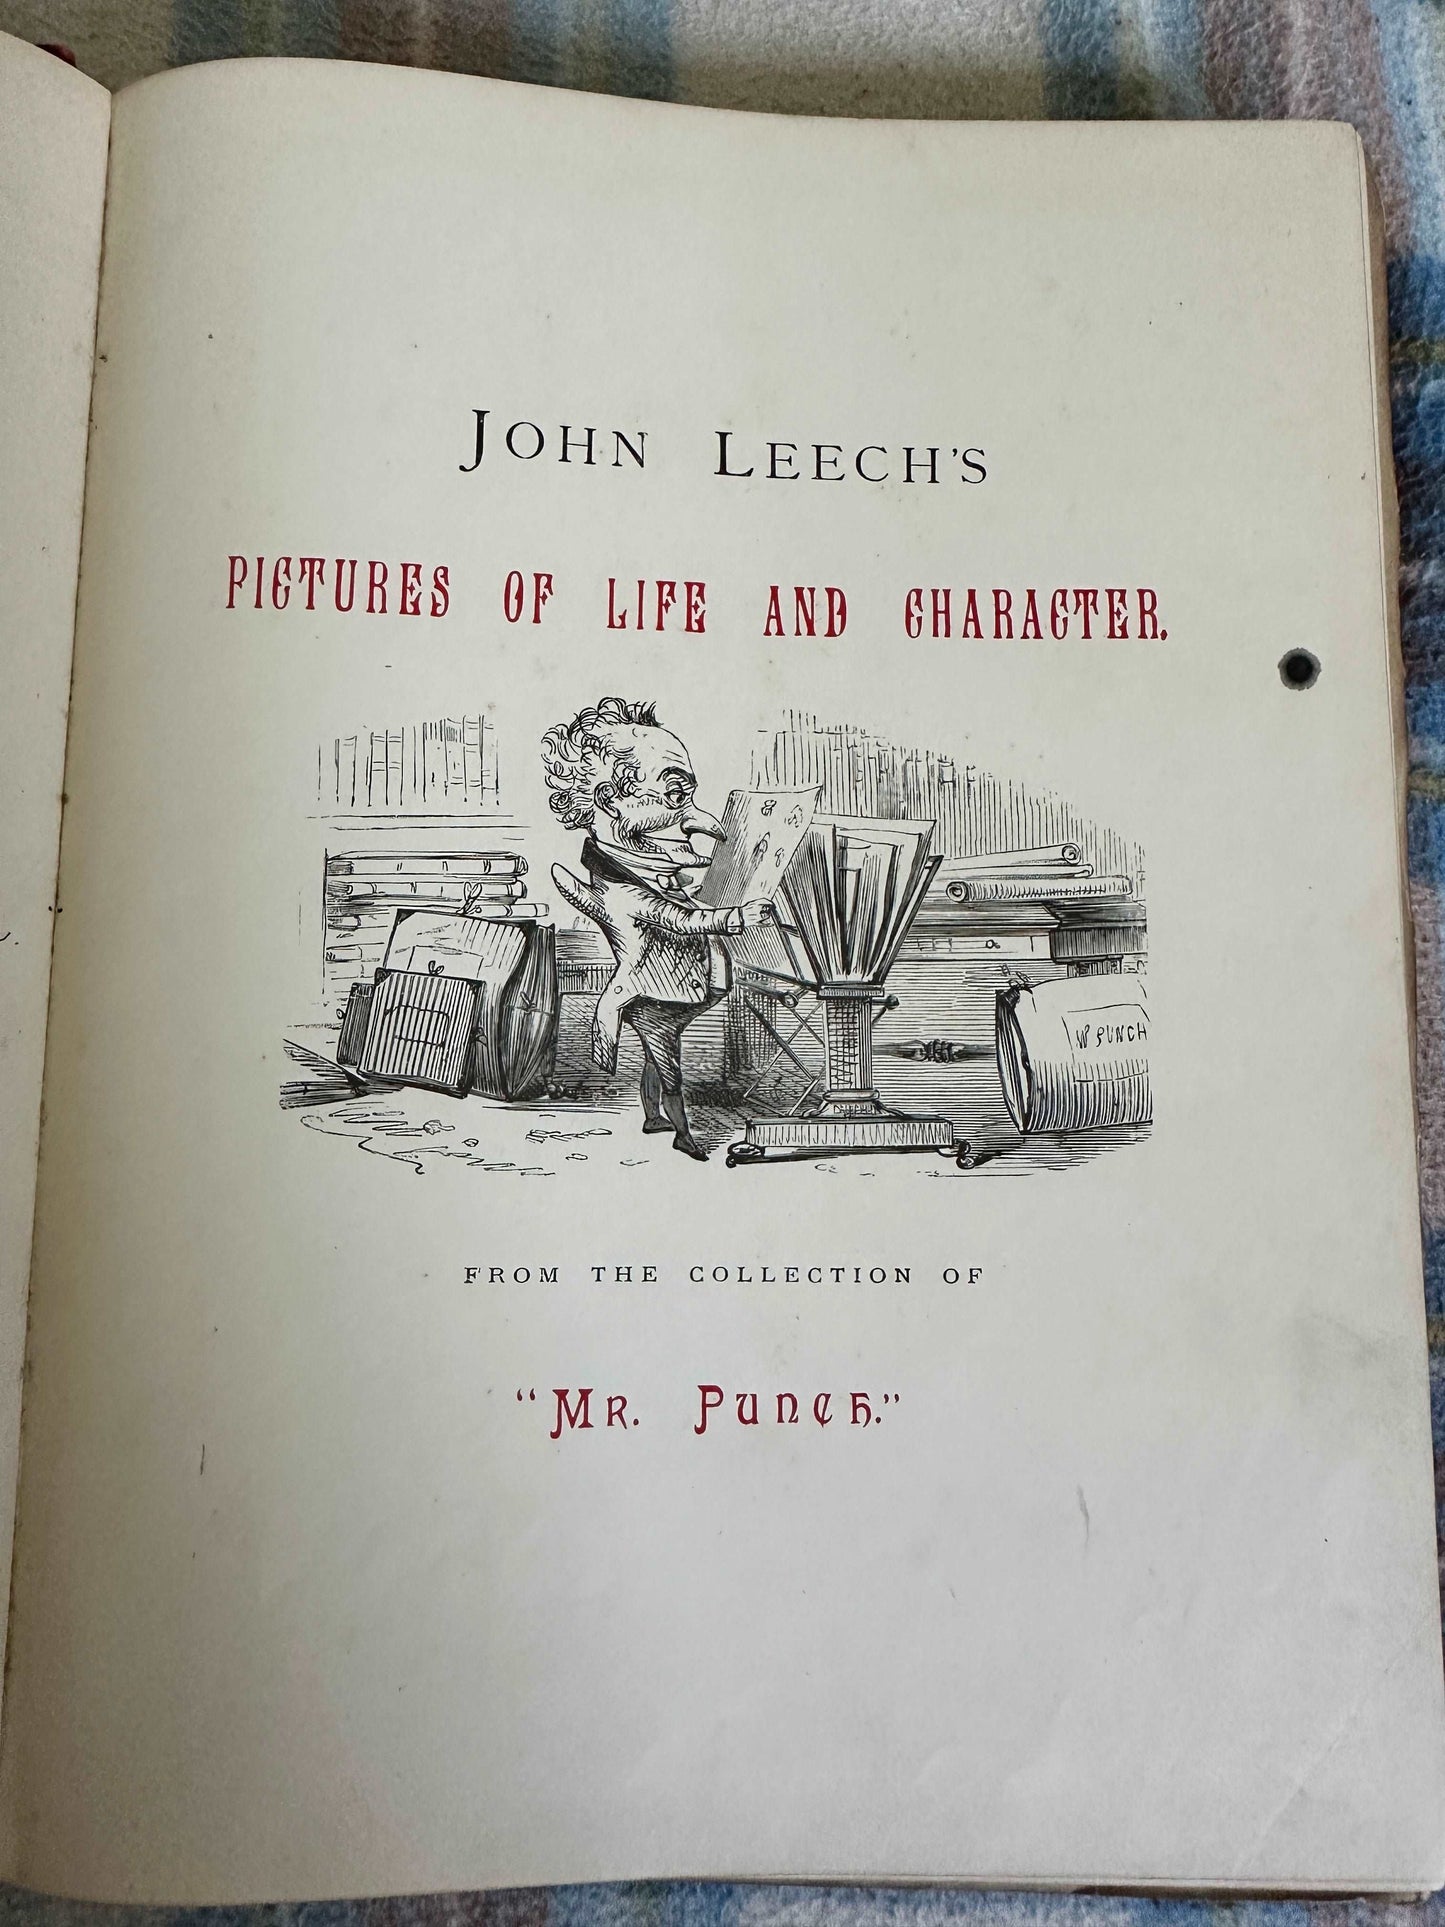 1887 John Leech’s Pictures Of Life & Character from the collection of “Mr Punch” Bradbury & Agnew